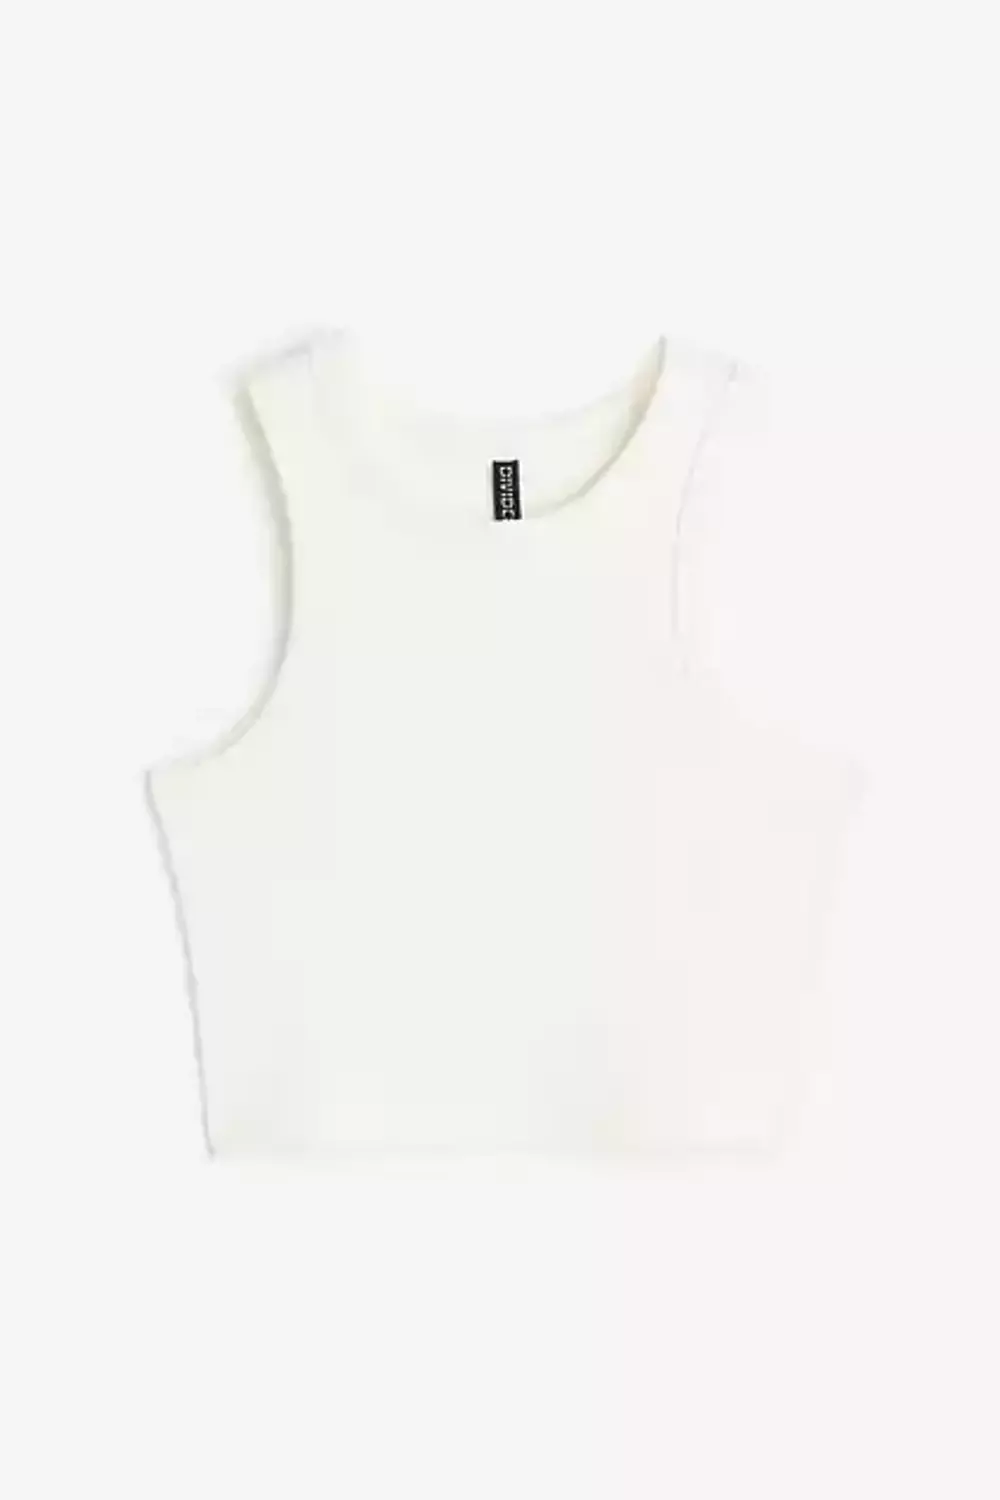 White Tank Top hover image